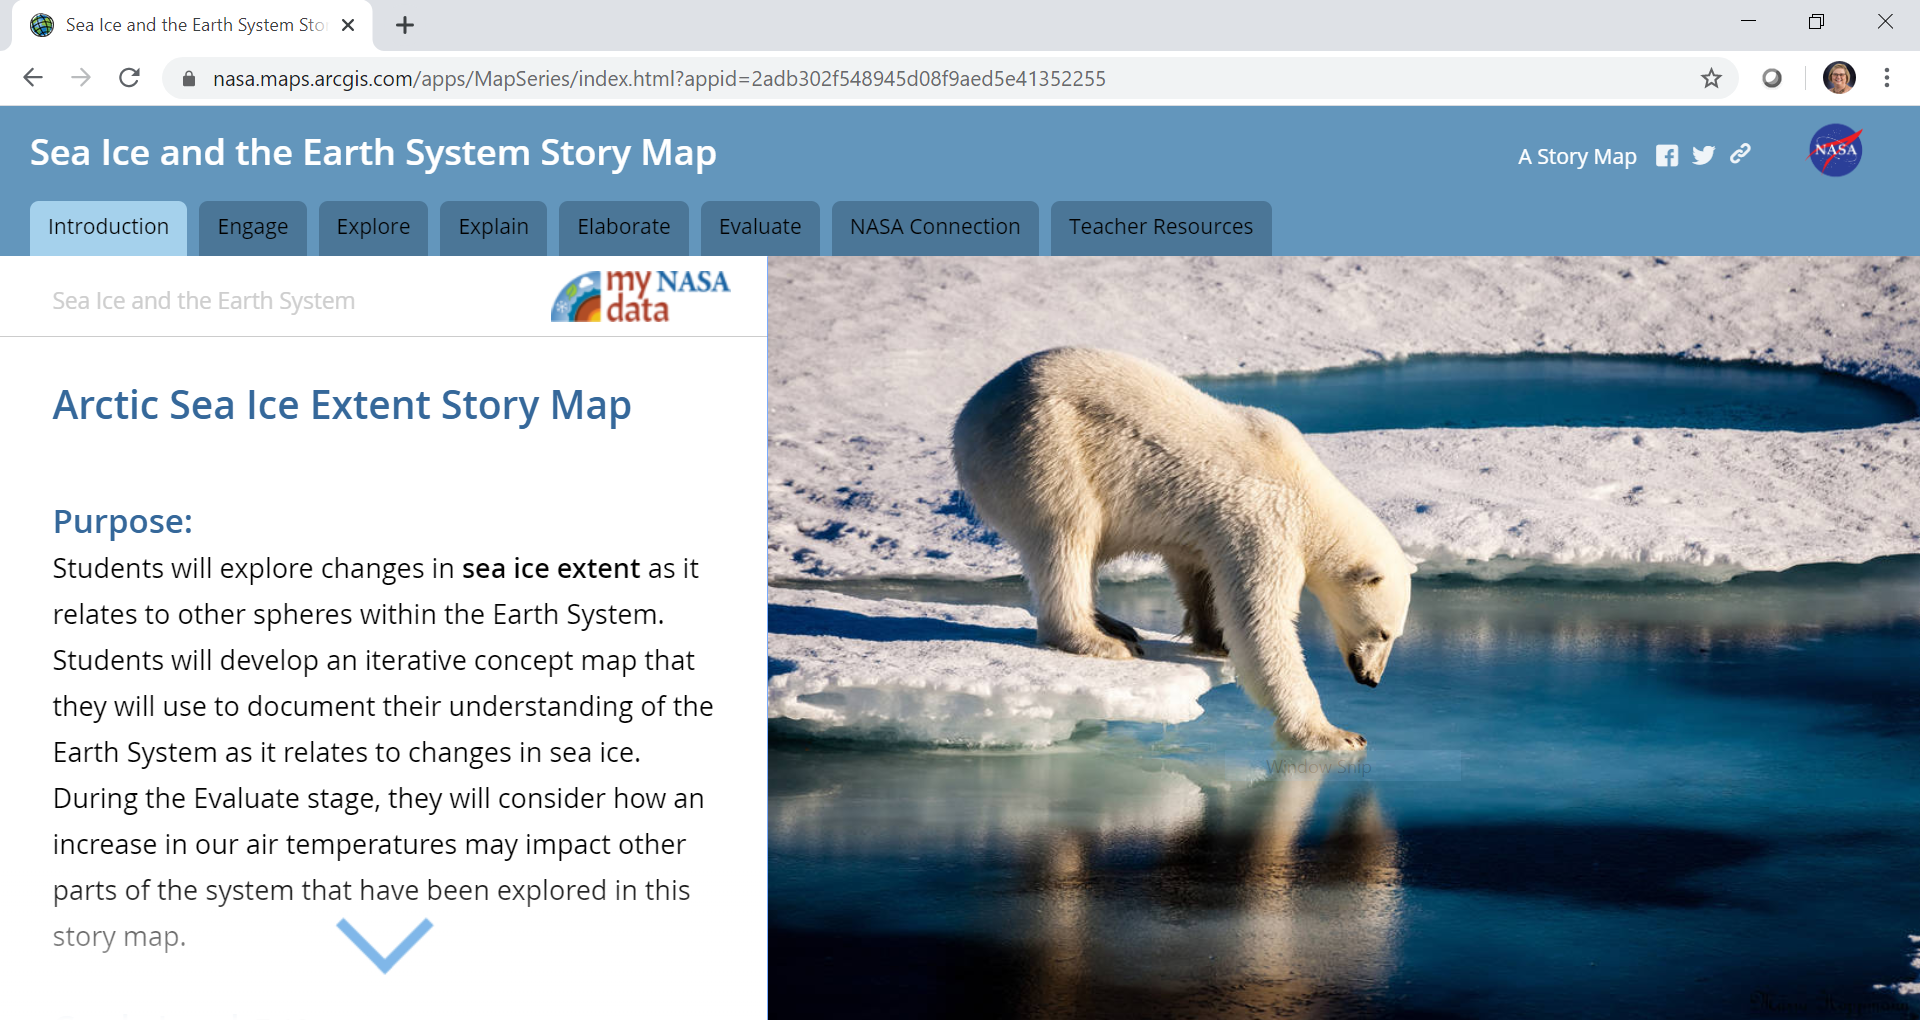 My NASA Data Sea Ice and the Earth System Story Map